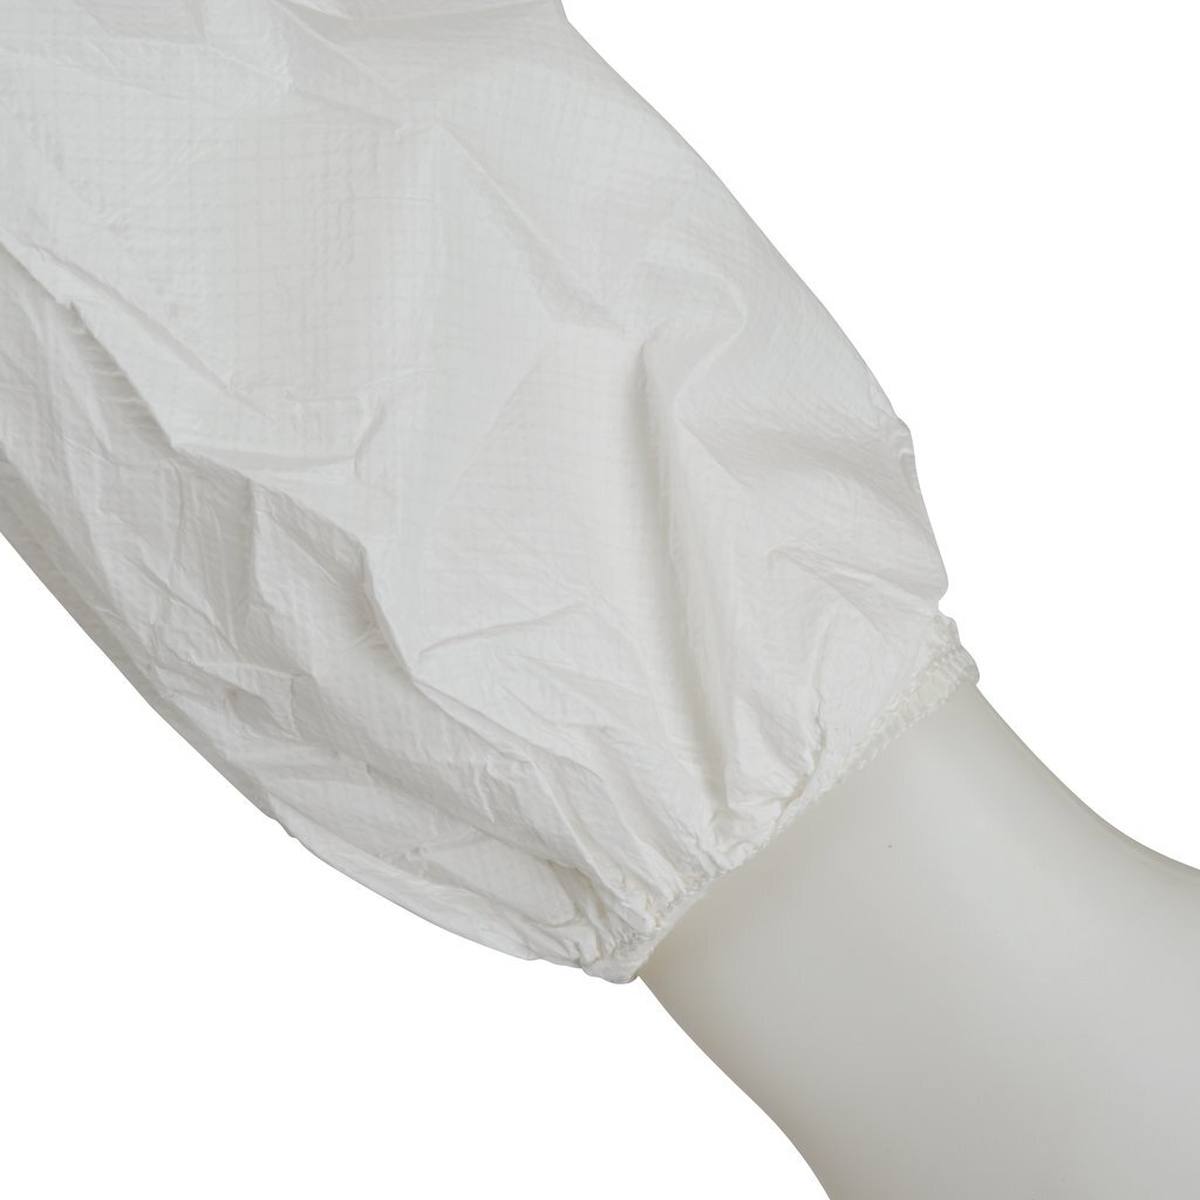 3M 4510 coverall, white, TYPE 5/6, size L, material microporous PE laminate, elastic band finish